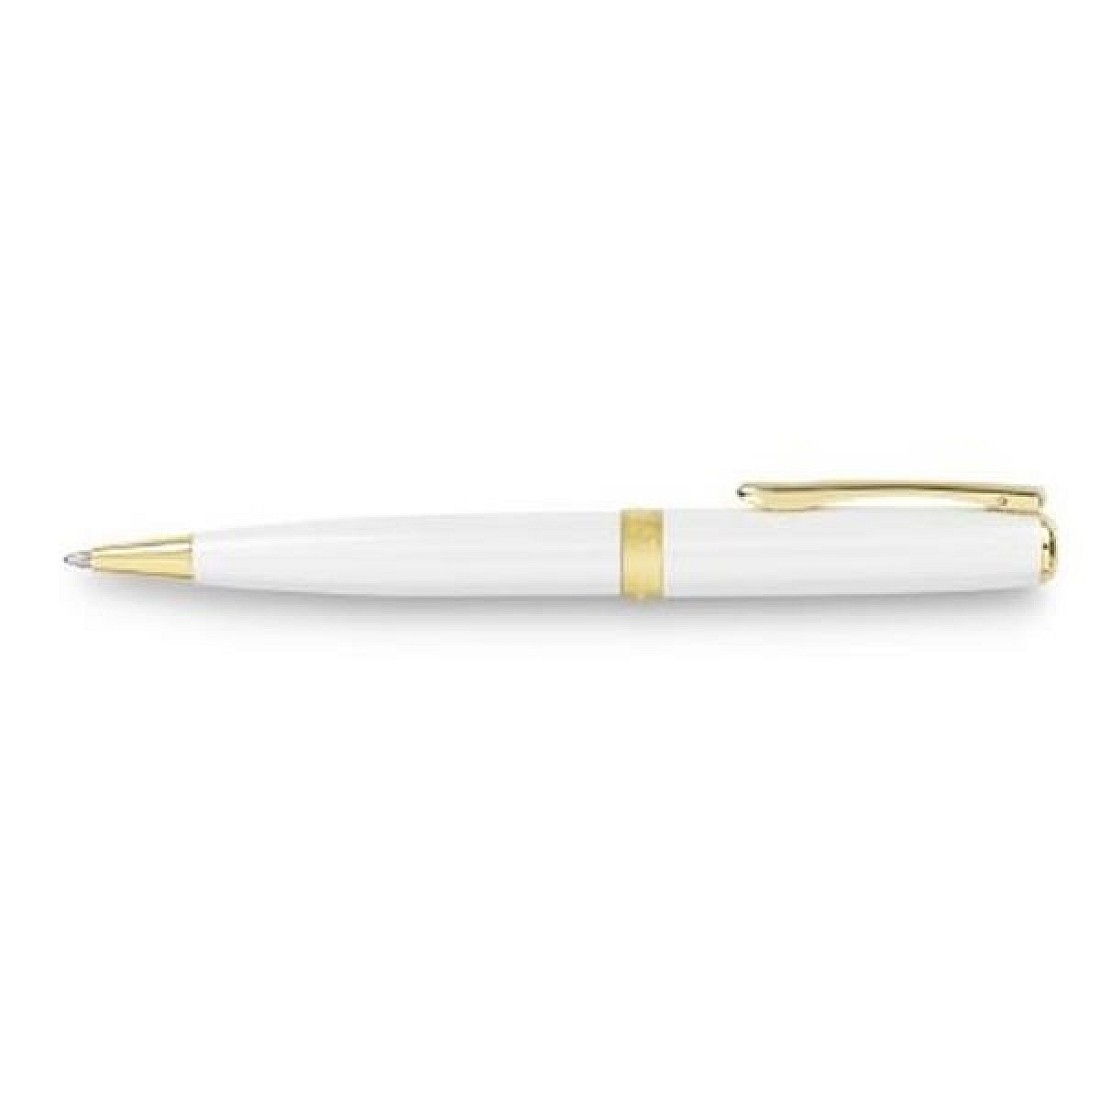 Diplomat Excellence A Pearl White Gold Ballpoint